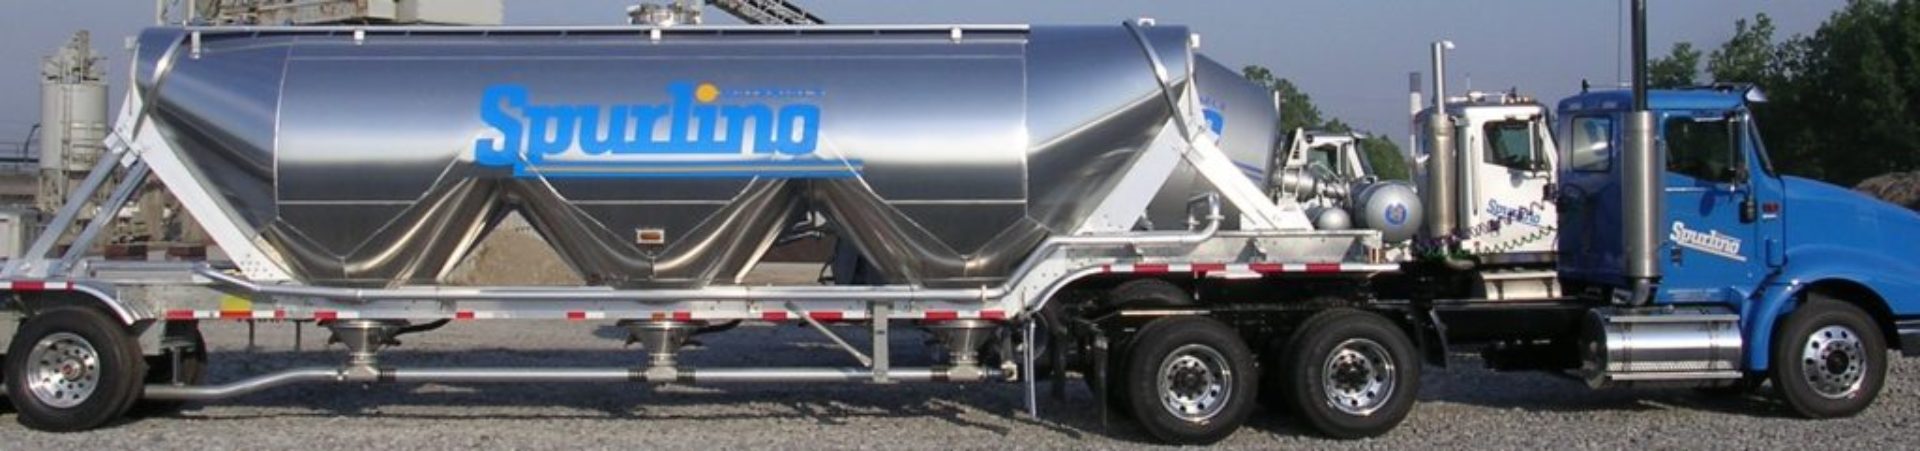 Cement Tanker_cropped 12 11 17